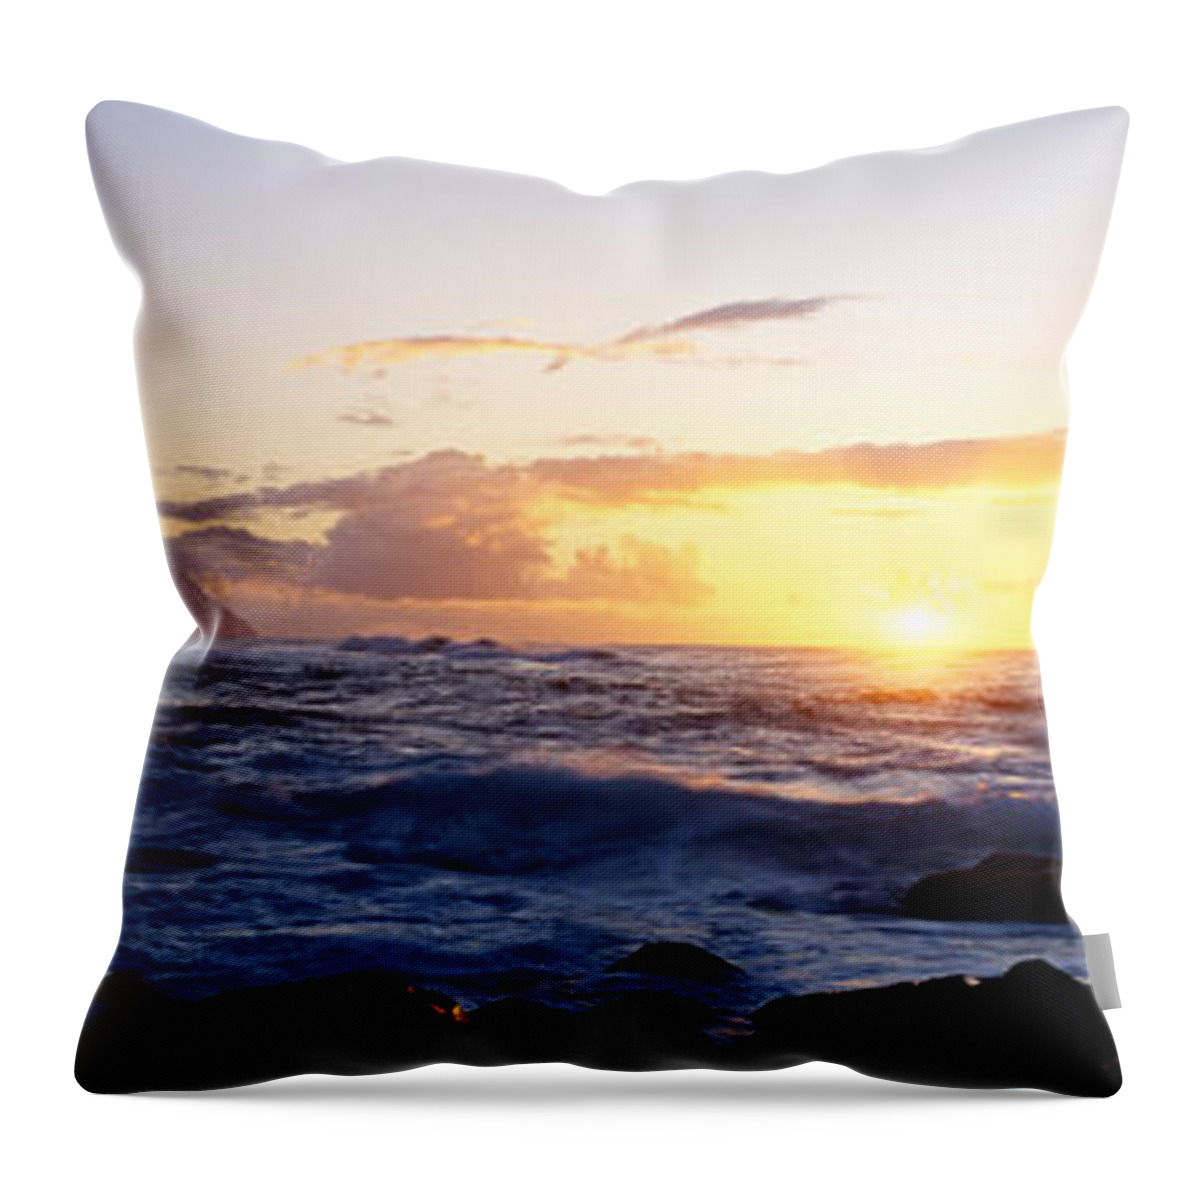 Photography Throw Pillow featuring the photograph Rock At The Coast, Na Pali Coast by Panoramic Images